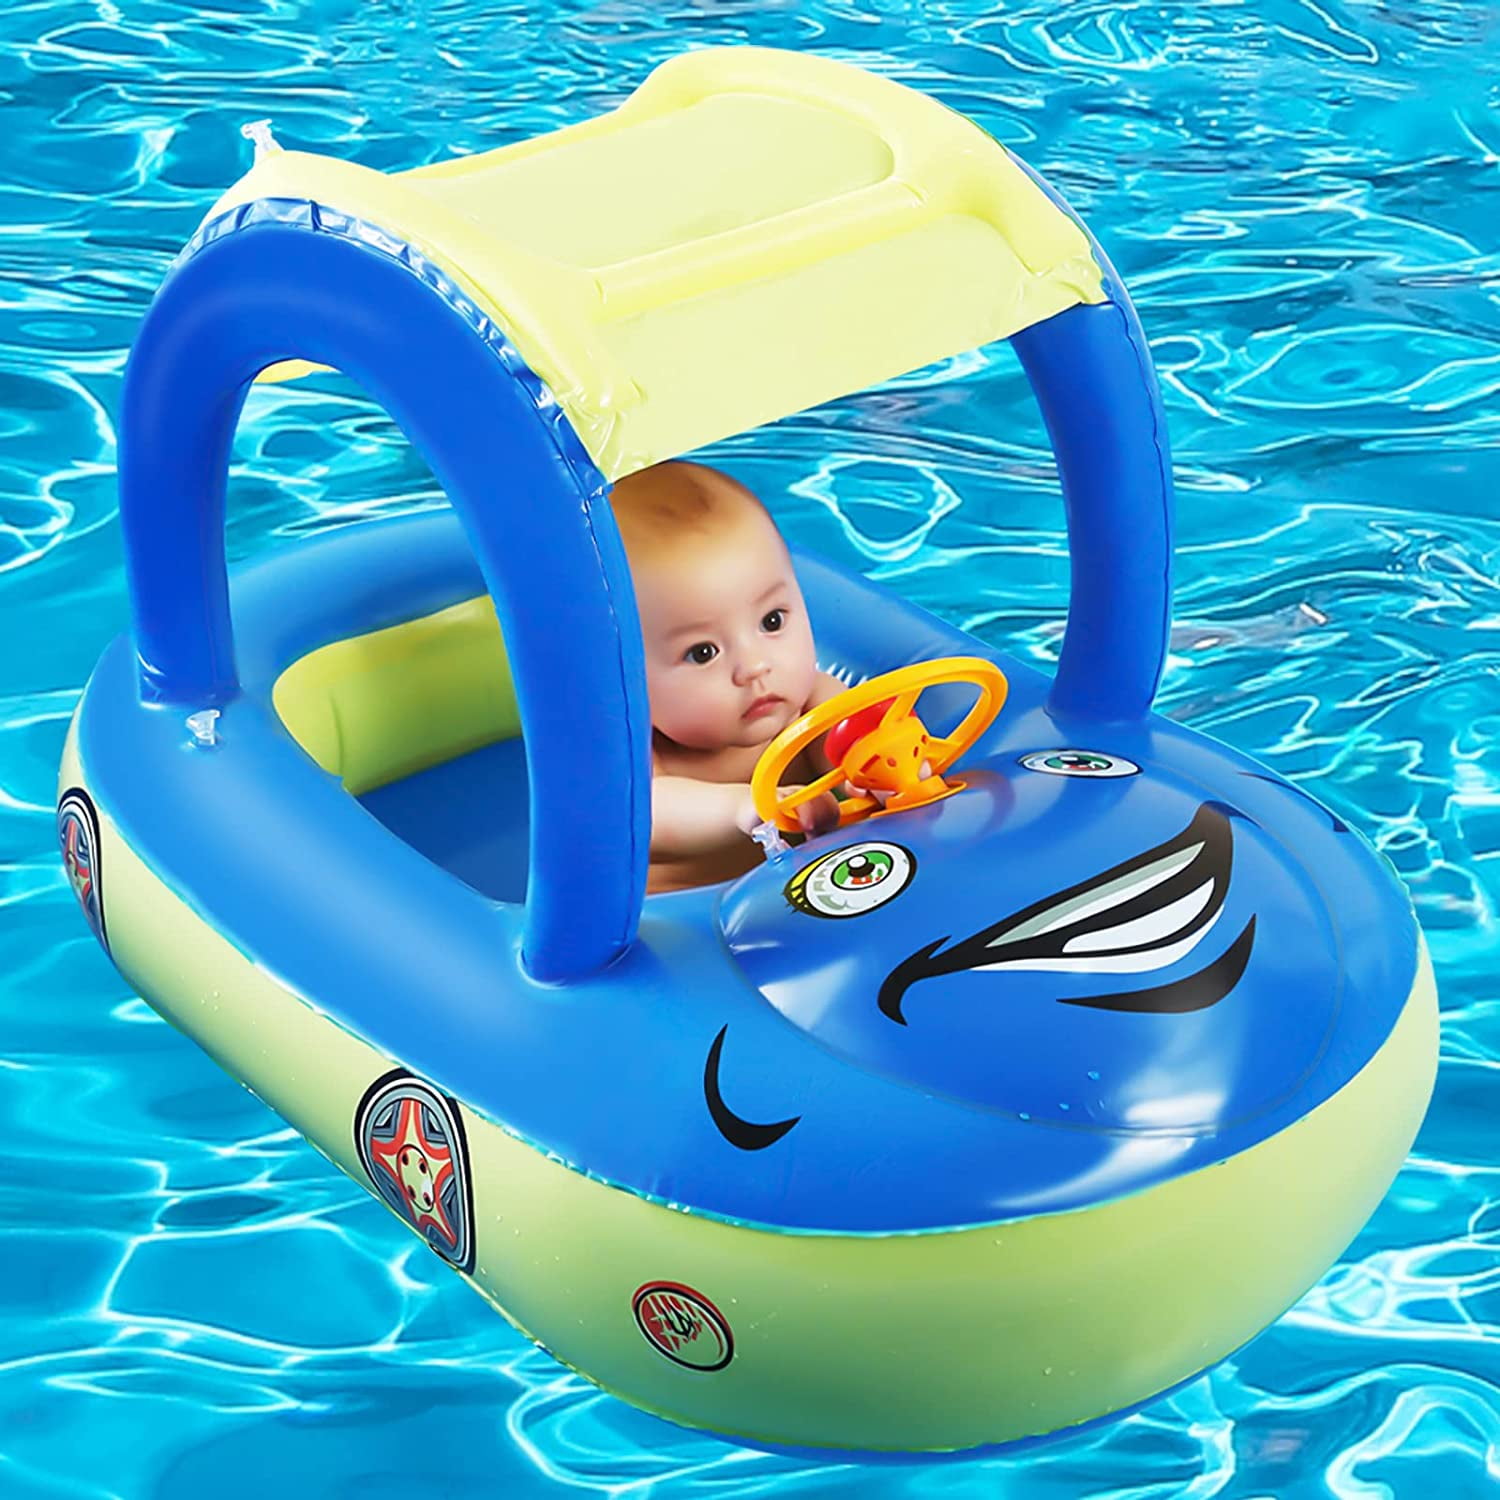 Infant Swim Floats Safety Seat Boat Trainer Children Float Bathtub Pool Toys Outdoor Swimming Pool Accessories Kids Toddlers of 3-36 Months Baby Swimming Pool Floats Ring with Double Airbags Pink 